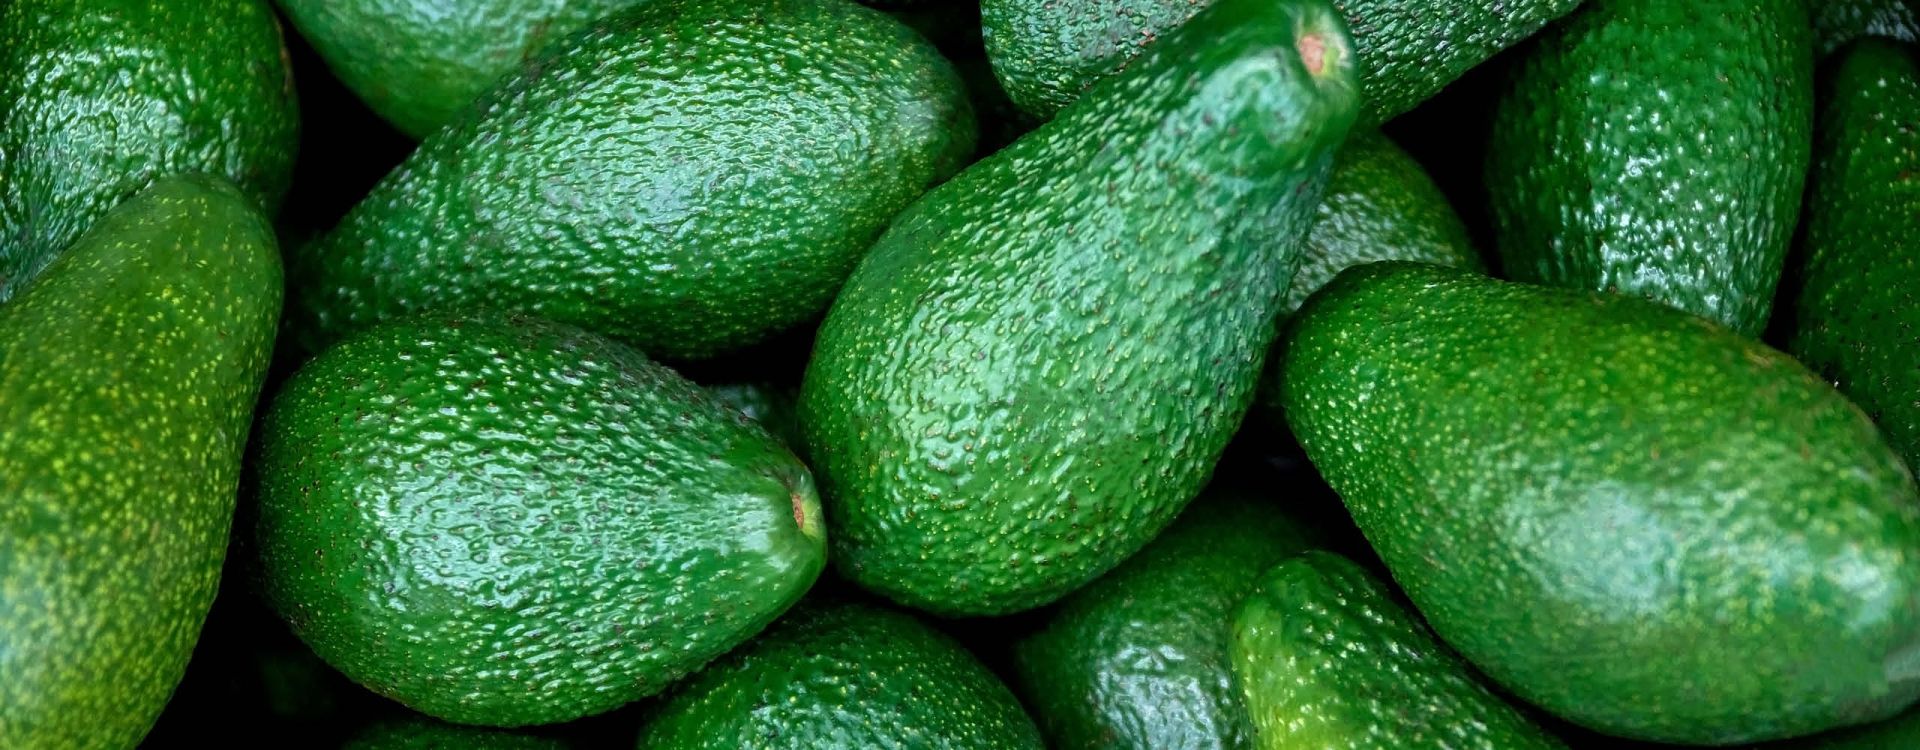 Can You Eat Avocado While Pregnant? (Yes–Here's Why) Article Image